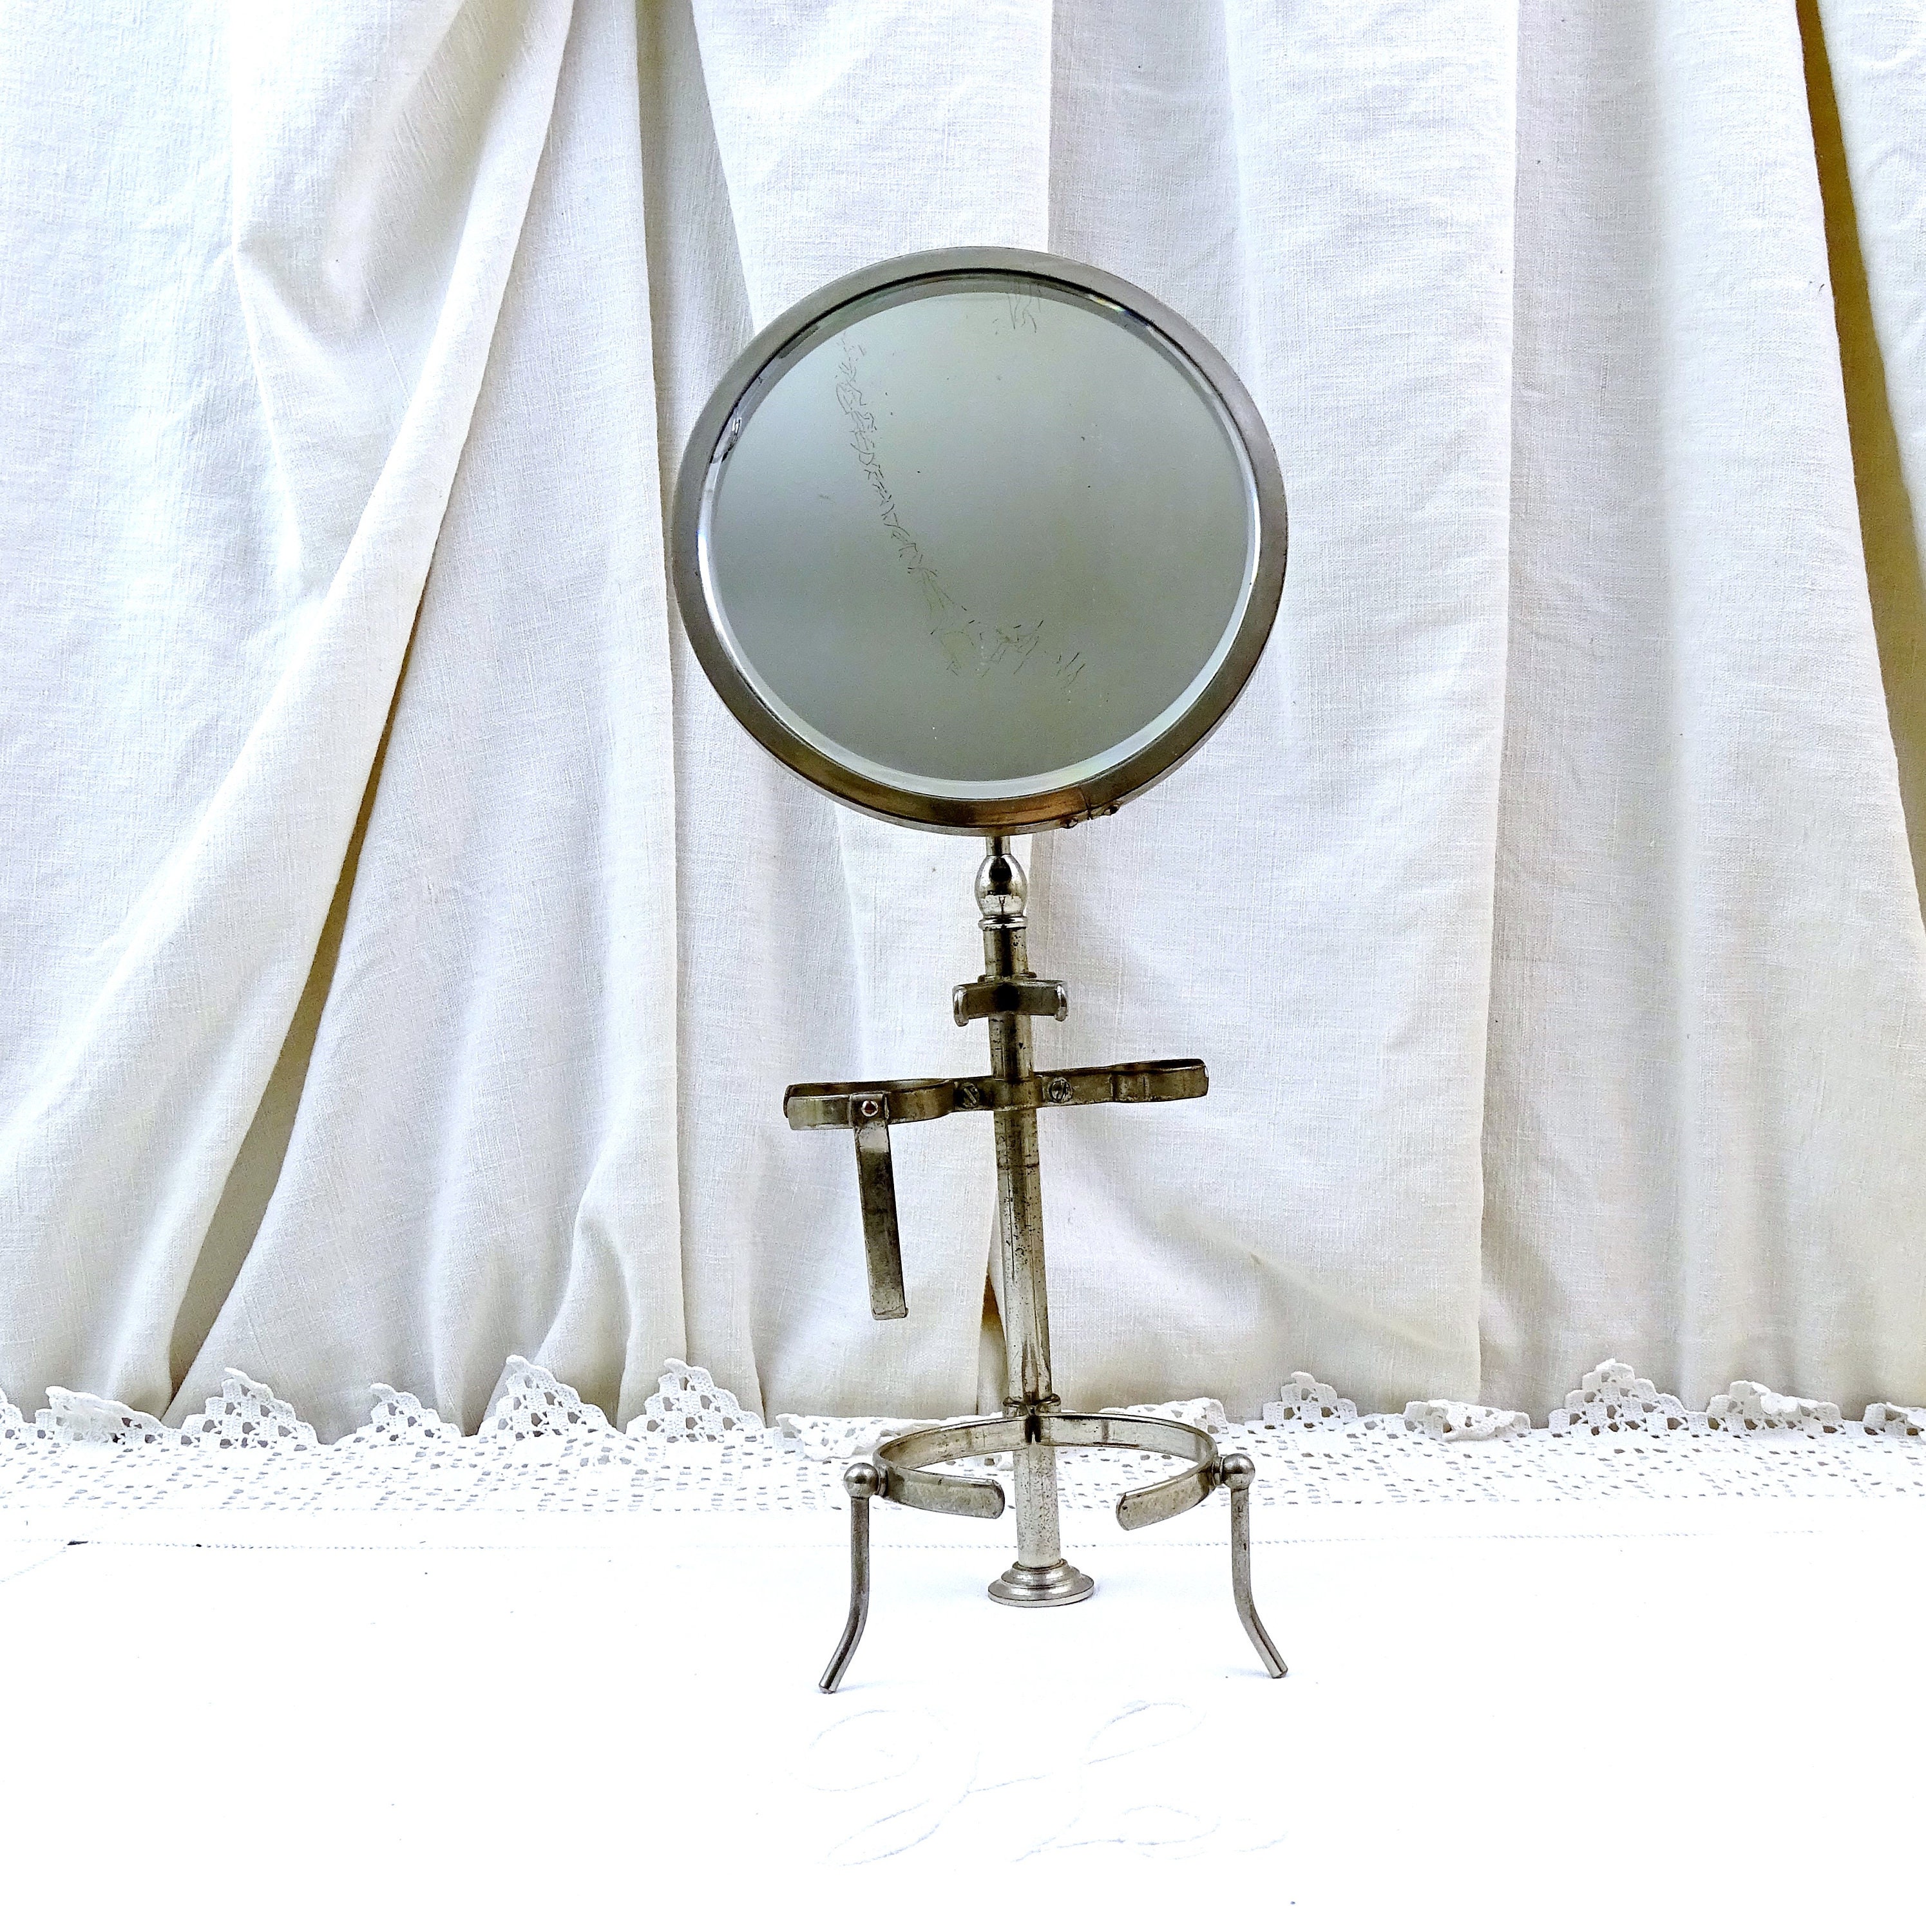 French Antique Shaving Stand with Round Adjustable Mirror, Vintage Bathroom  Man's Grooming Accessory from Victorian France, Vanity Stand